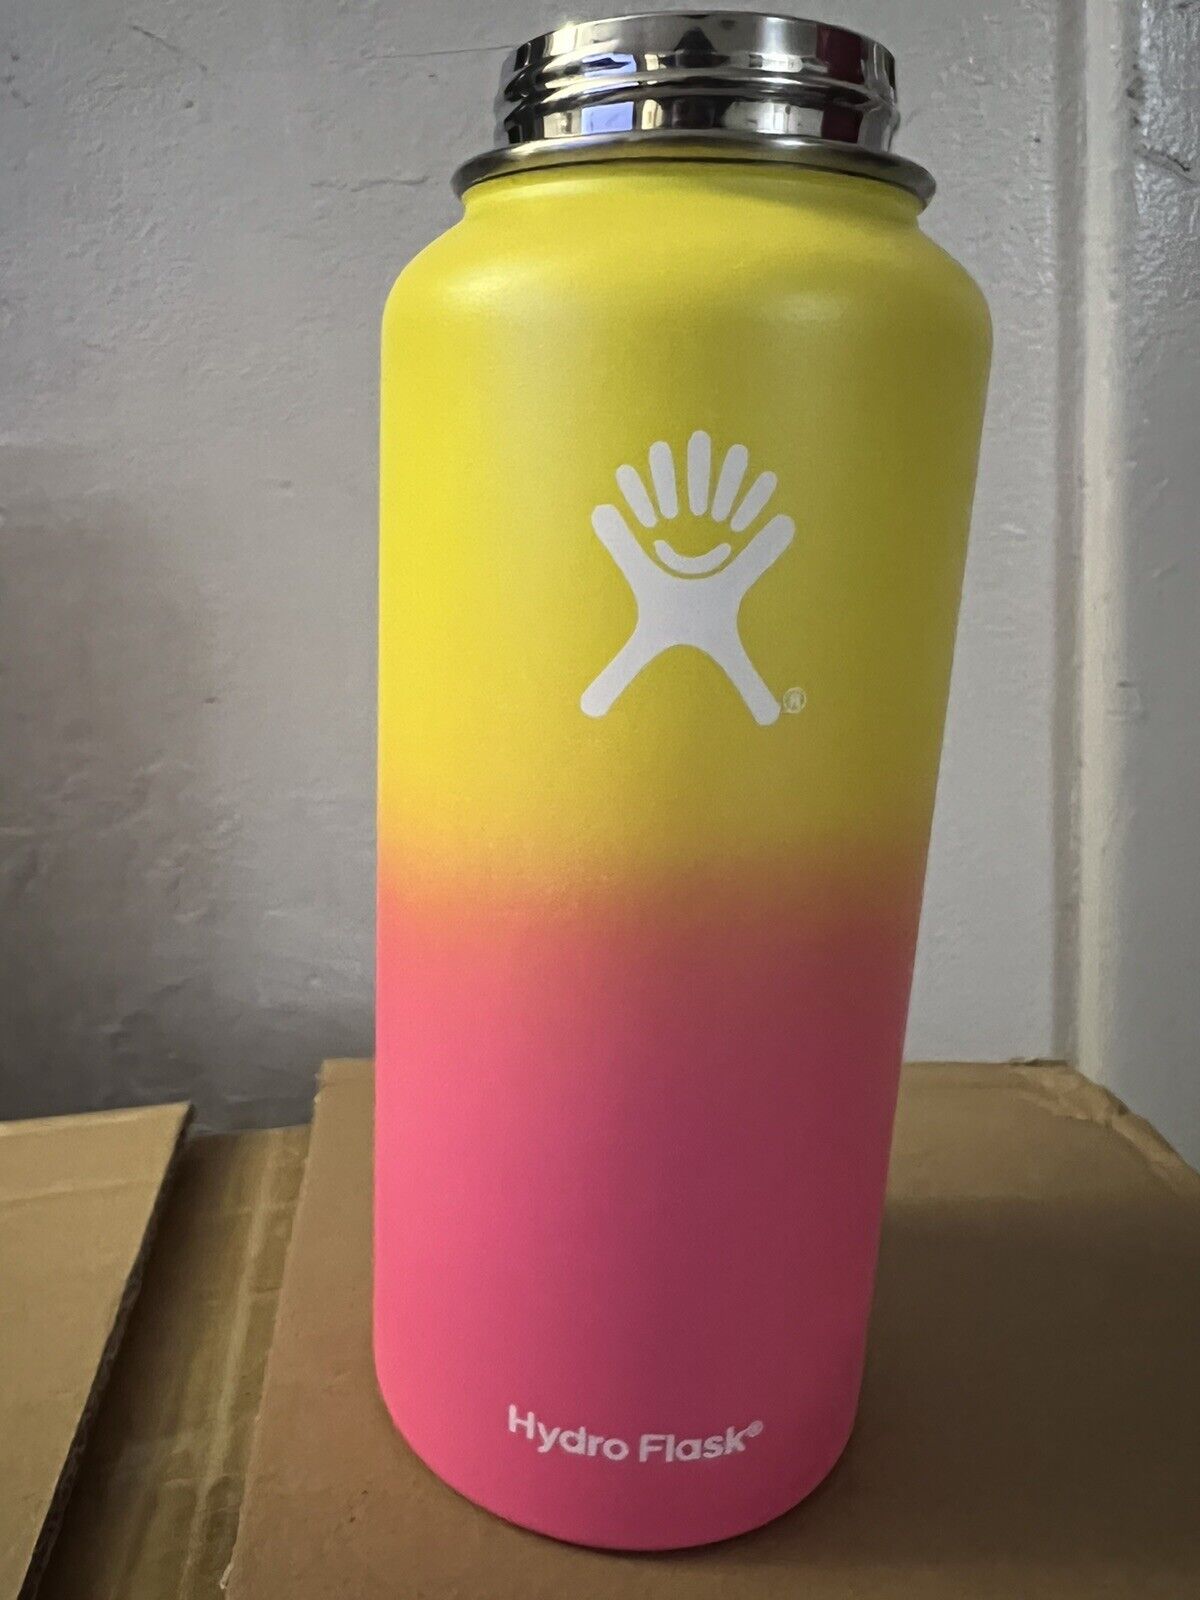 32 Oz. Hydroflask With Straw Lid Stainless Steel Tumbler Sunset Colors